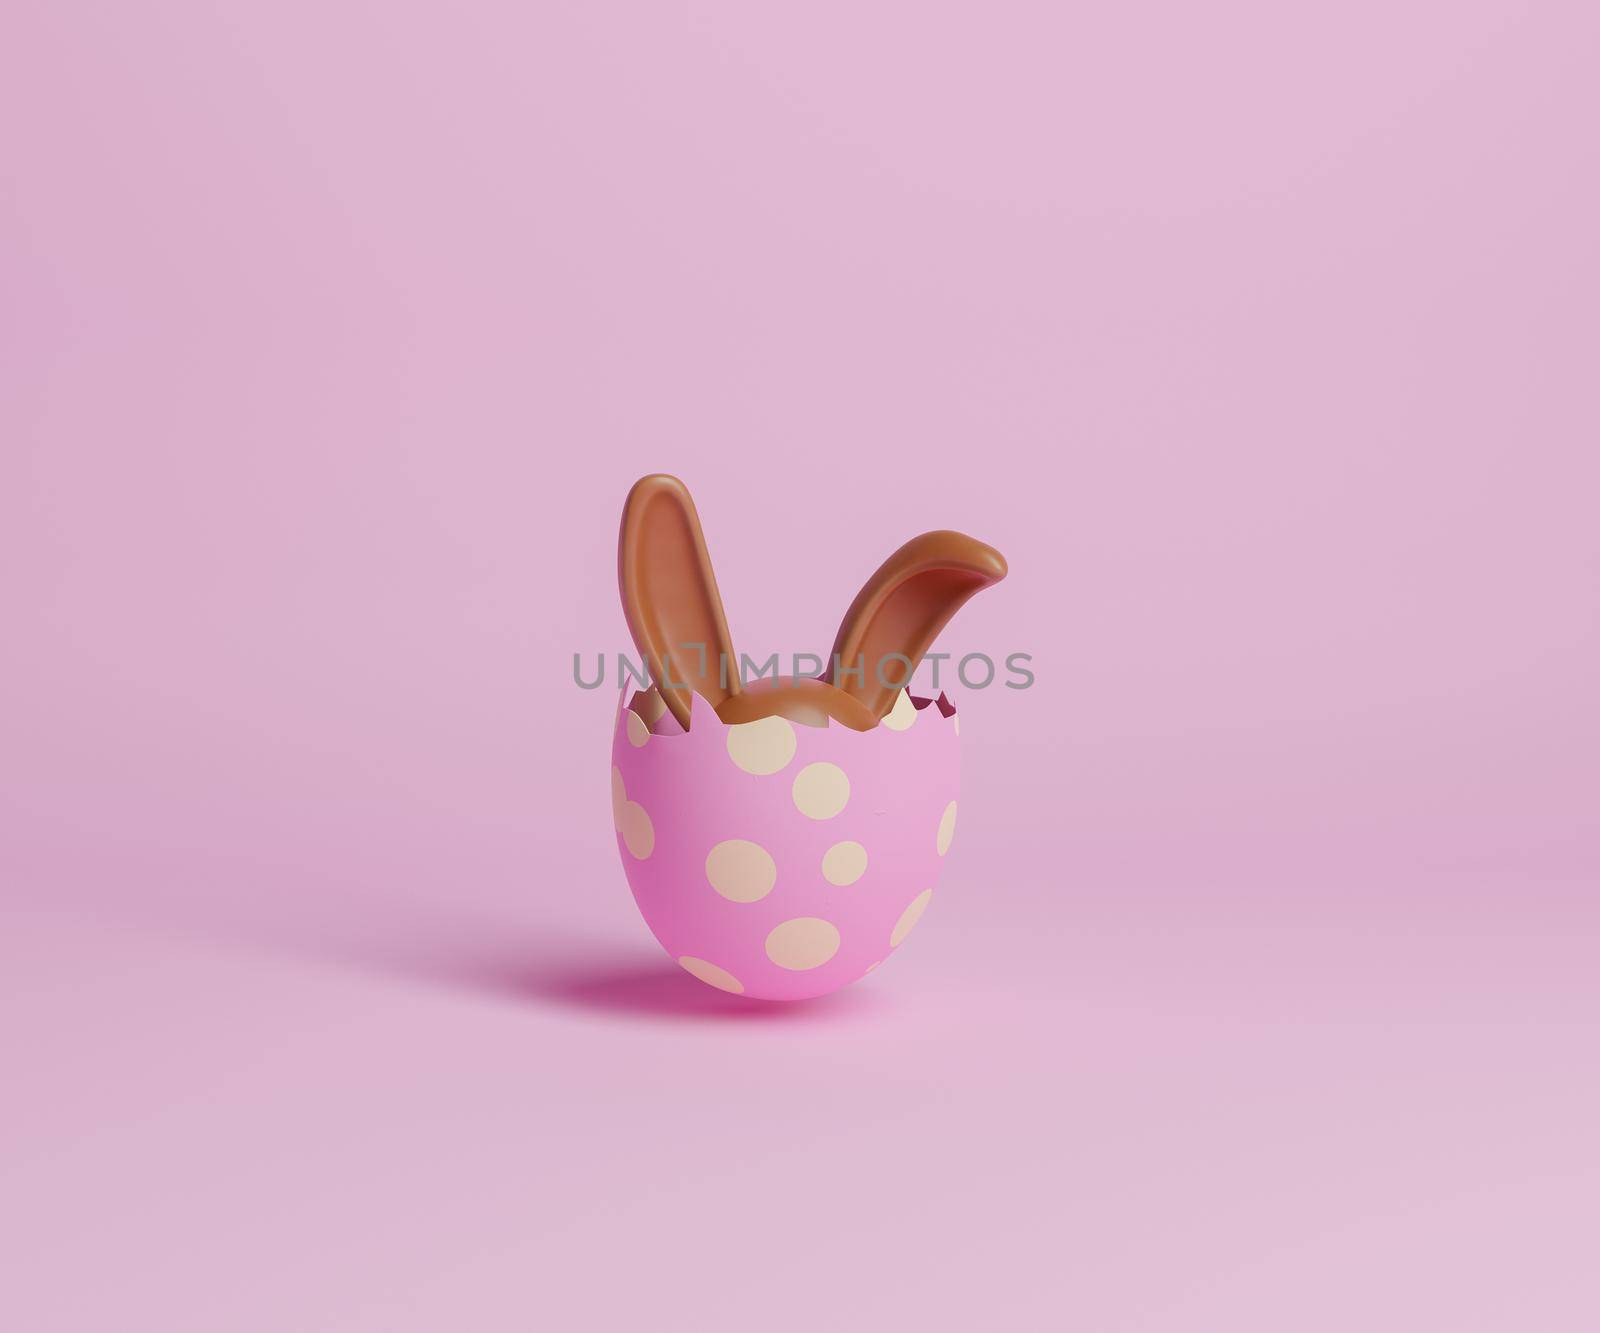 broken easter egg with chocolate bunny ears peeking out by asolano